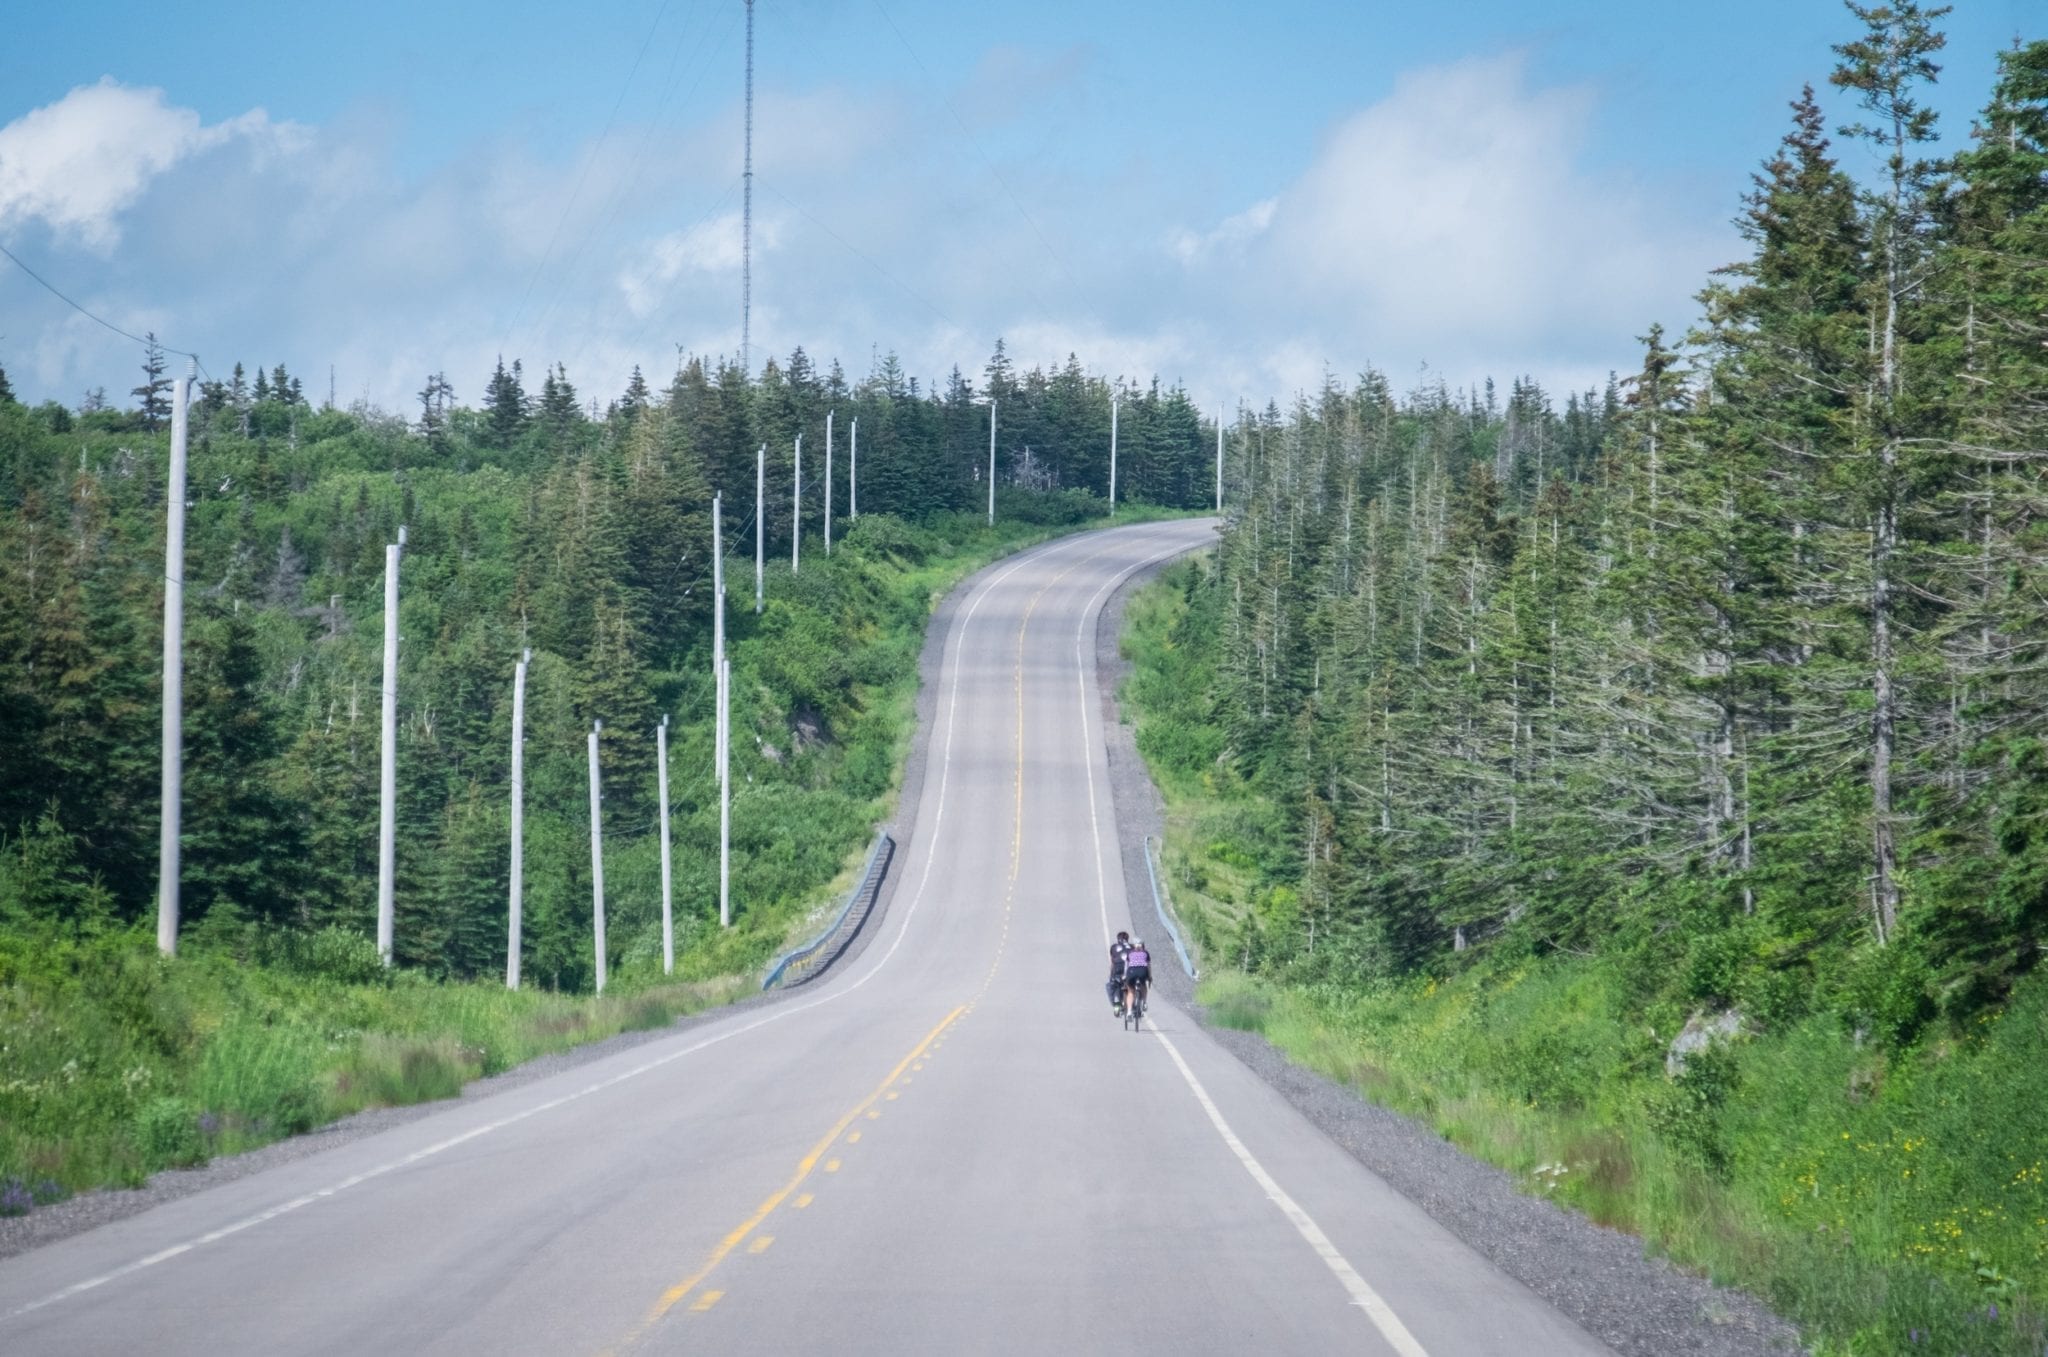 A road leading straight ahead, surrounded by pine trees. Two cyclists are riding along the road.